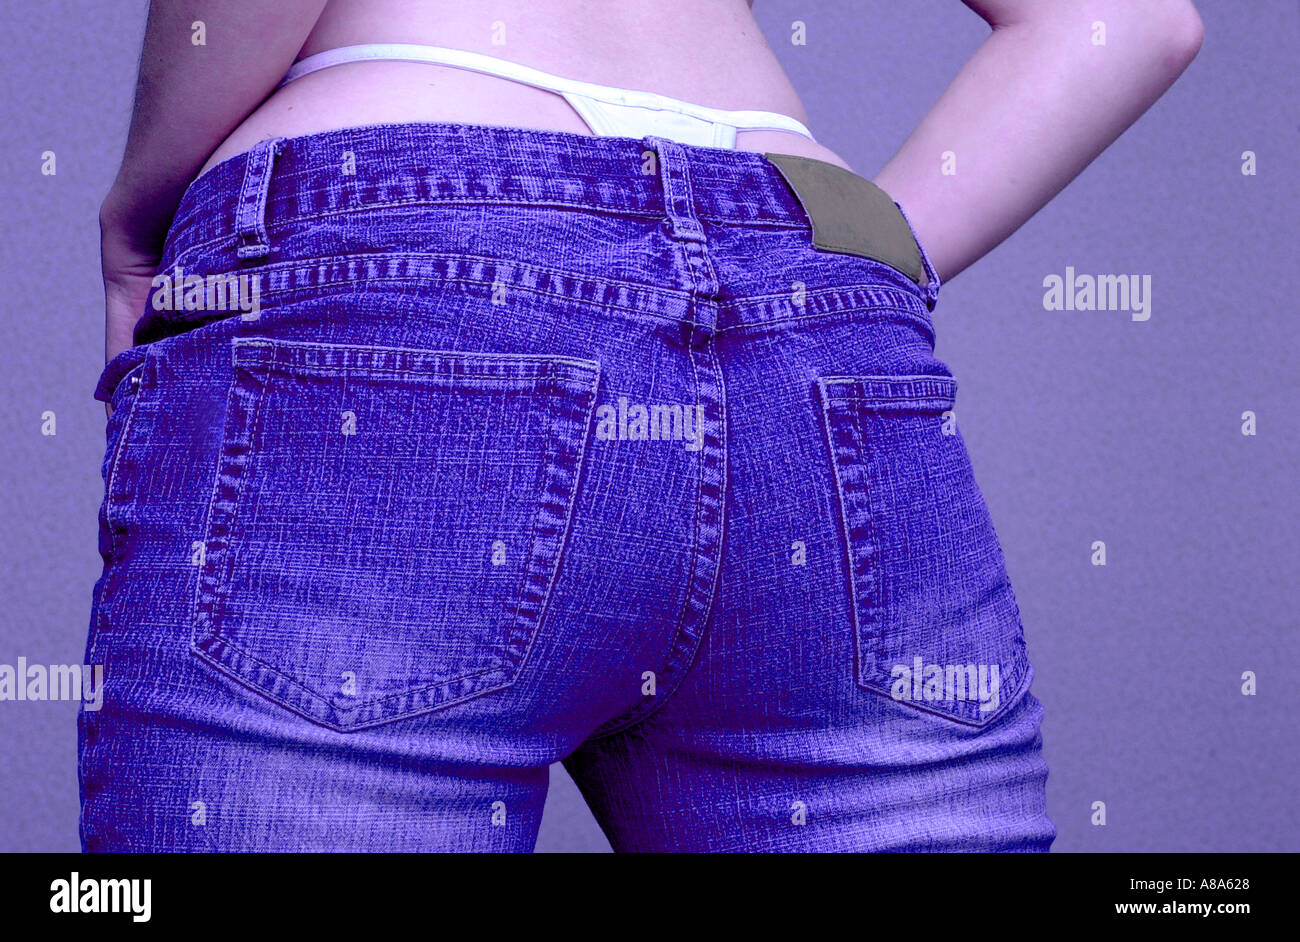 Woman in jeans with thong panties showing above pants Stock Photo